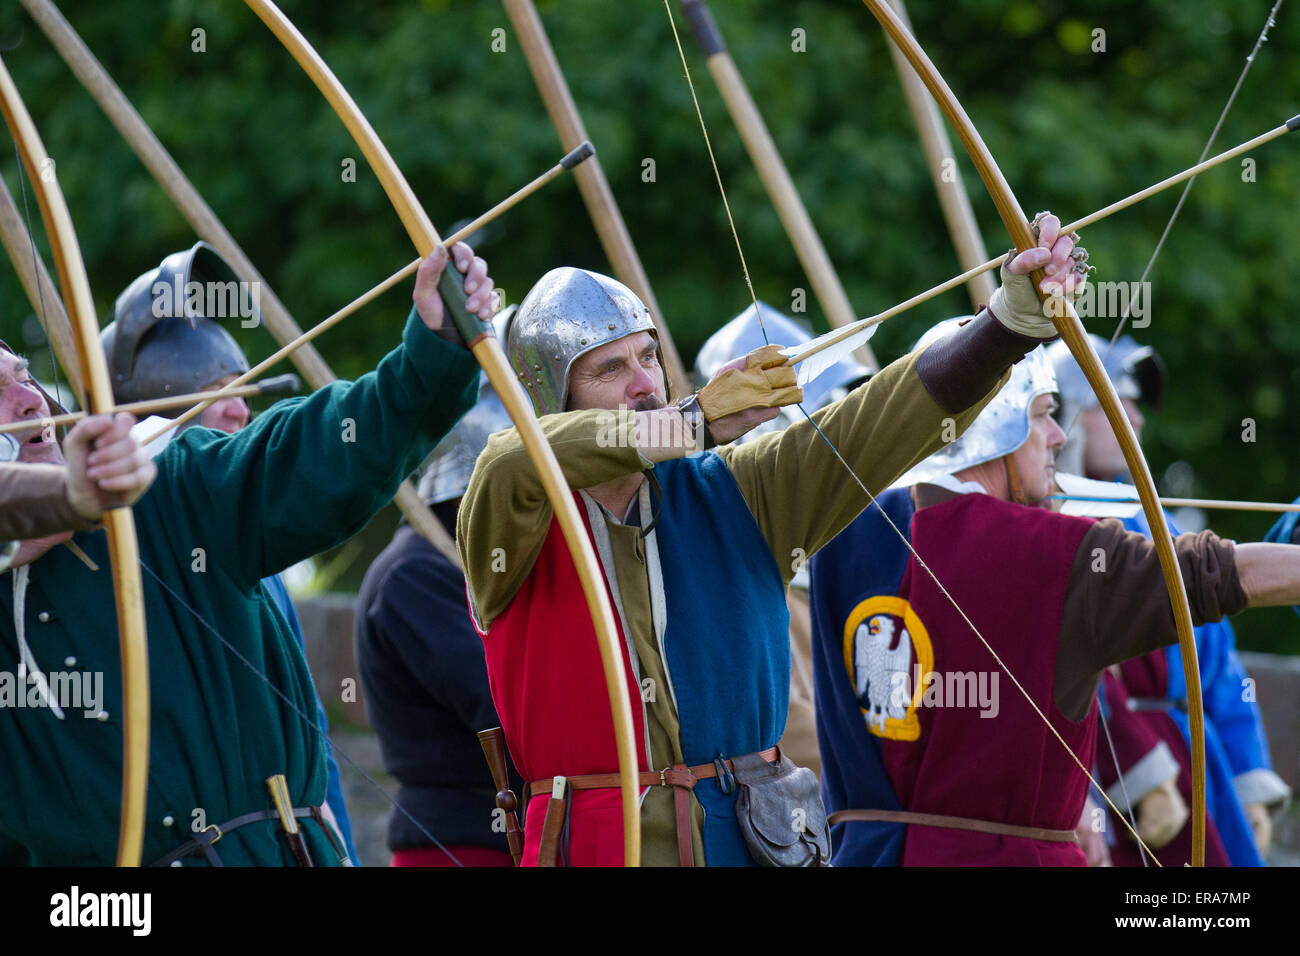 English Bowmen longbow Archers at the War of the Roses re-enactment by Sir John Saviles Household and 15th-century archers group. Hoghton Tower Preston transformed with living history displays of craftsmen, soldiers and everyday life from the era of Elizabeth Woodville (the White Queen) and Richard III. Known as The Cousins War or War of the Roses was the dynastic struggle between the royal households of York and Lancaster which each claimed their right to rule from their links to the usurped Edward III. Hoghton, Lancashire, UK. May, 2015. Stock Photo